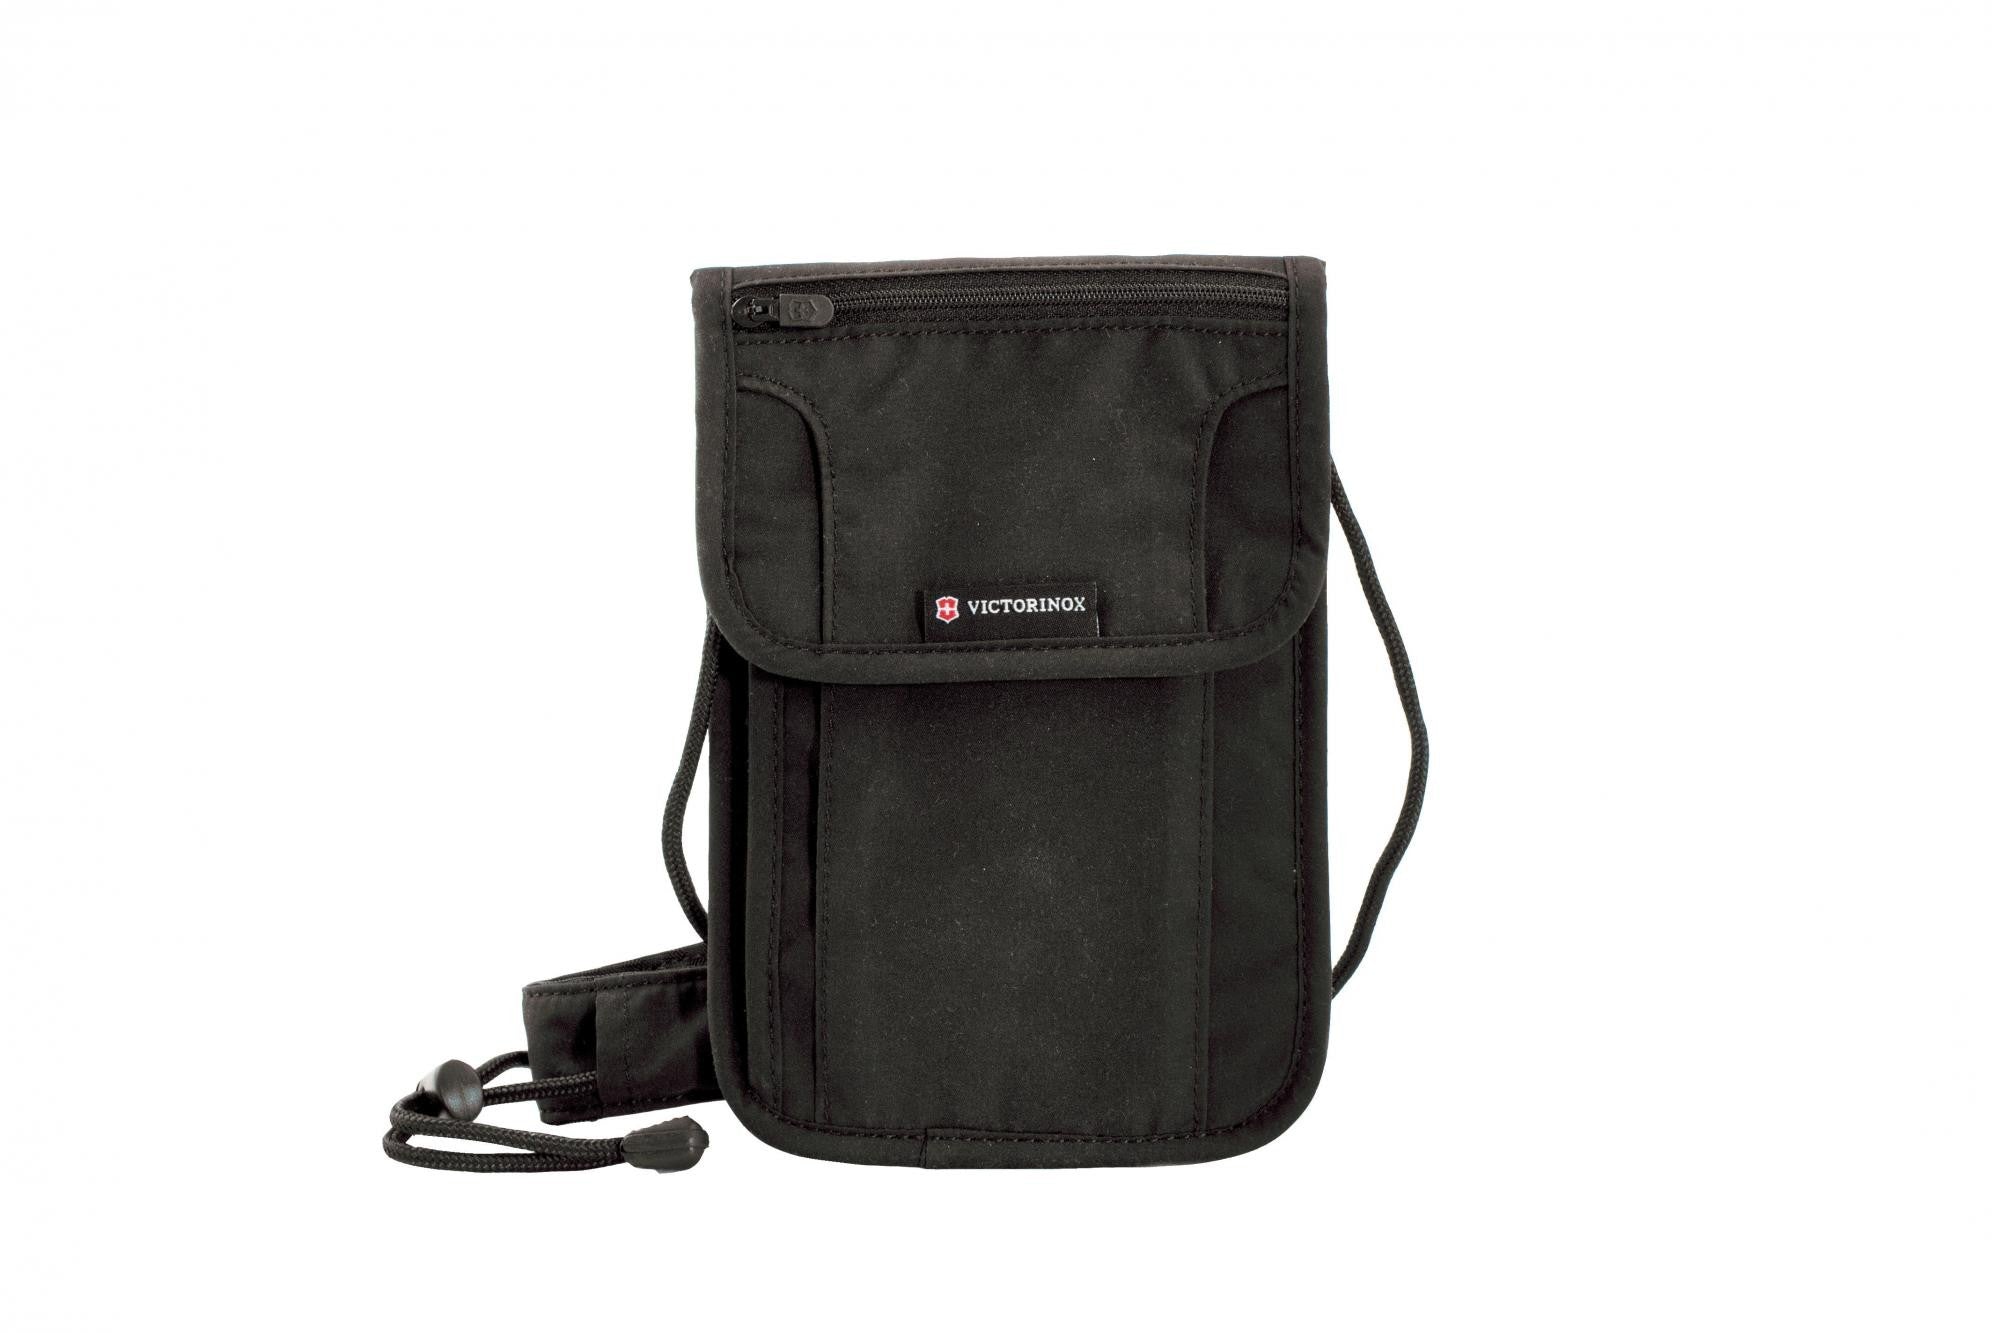 Victorinox Lifestyle Accessories 4.0 Deluxe Concealed Security Pouch with RFID Protection